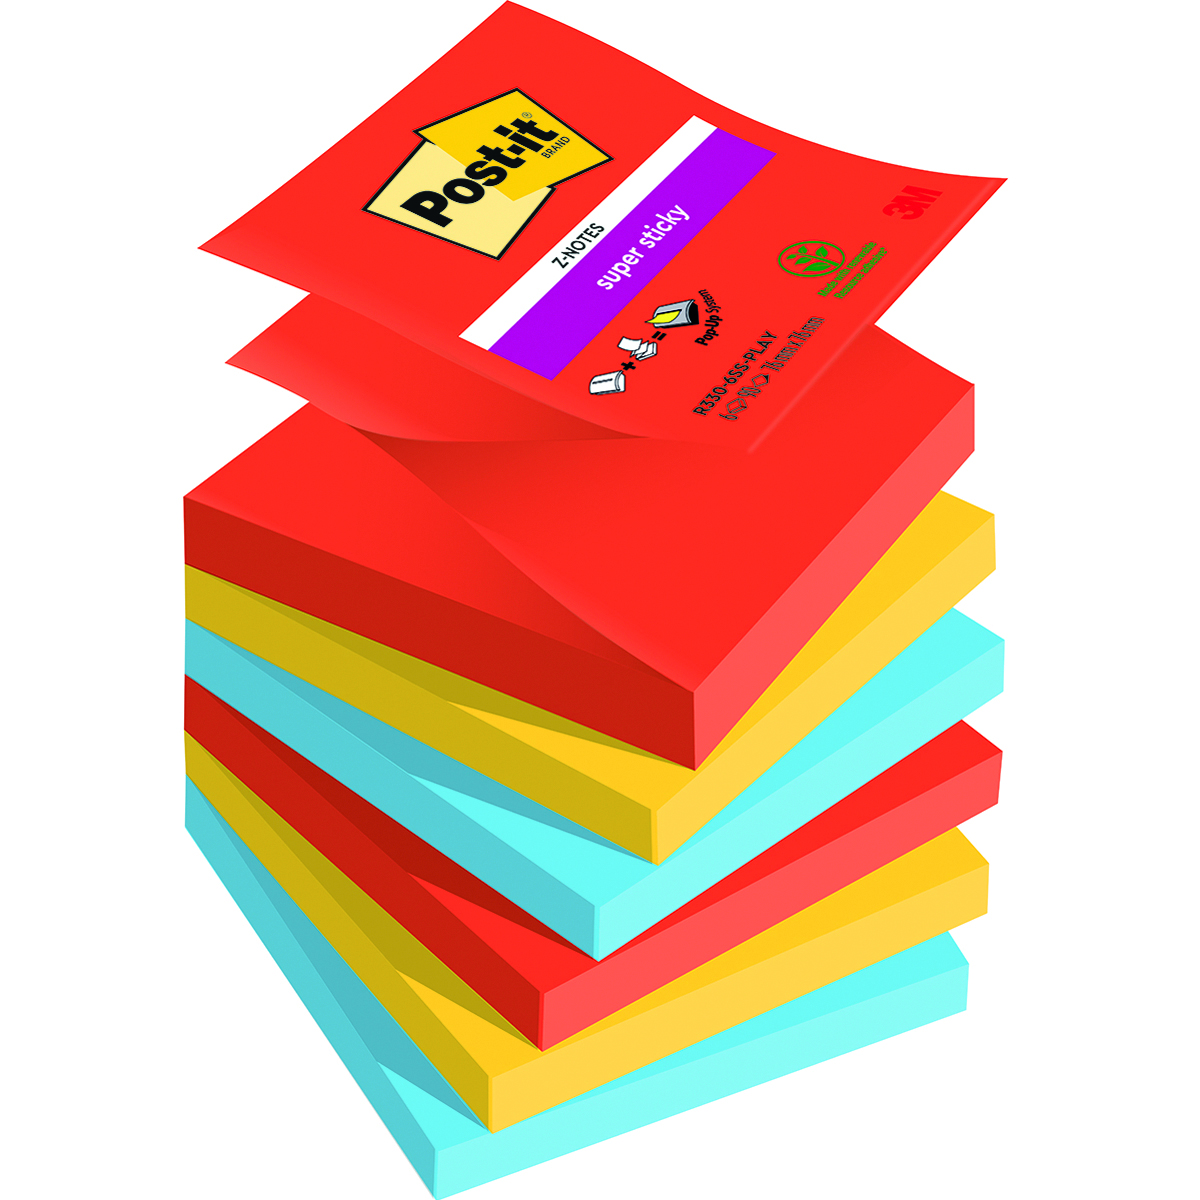 Notes couleurs Carnival SUPER STICKY POST-IT 76 x 76 mm